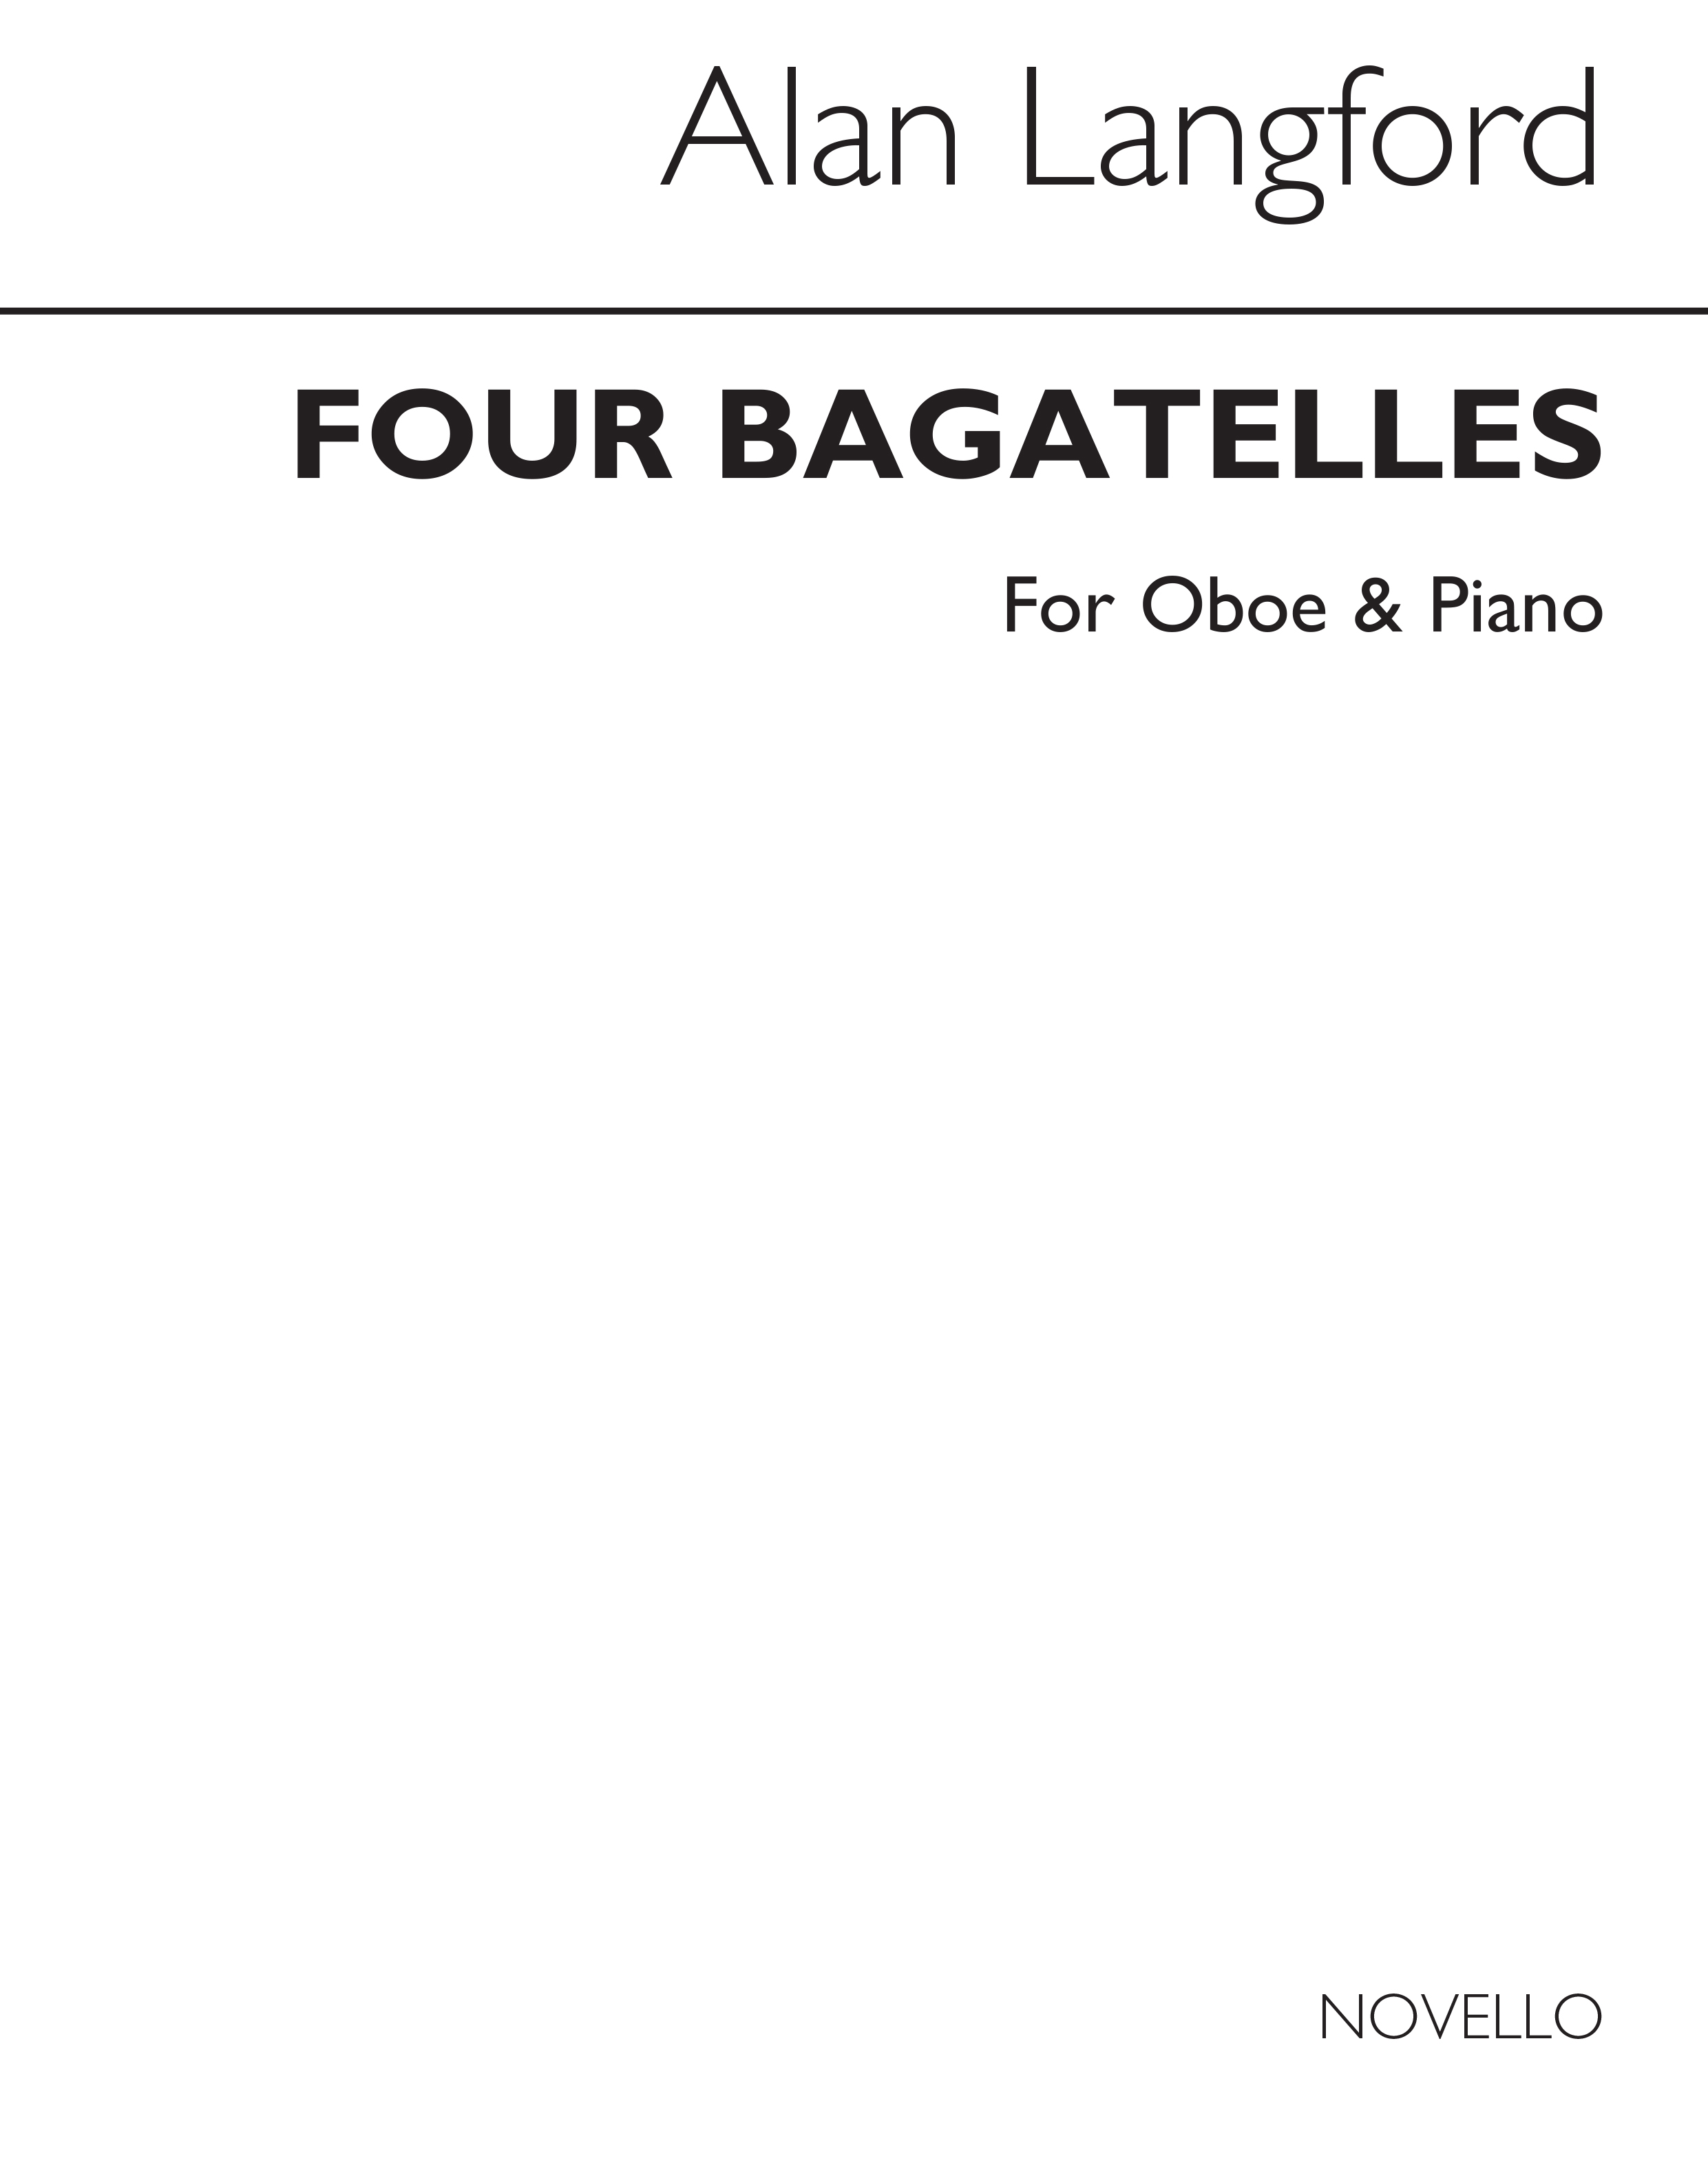 Langford: Four Bagatelles for Oboe and Piano